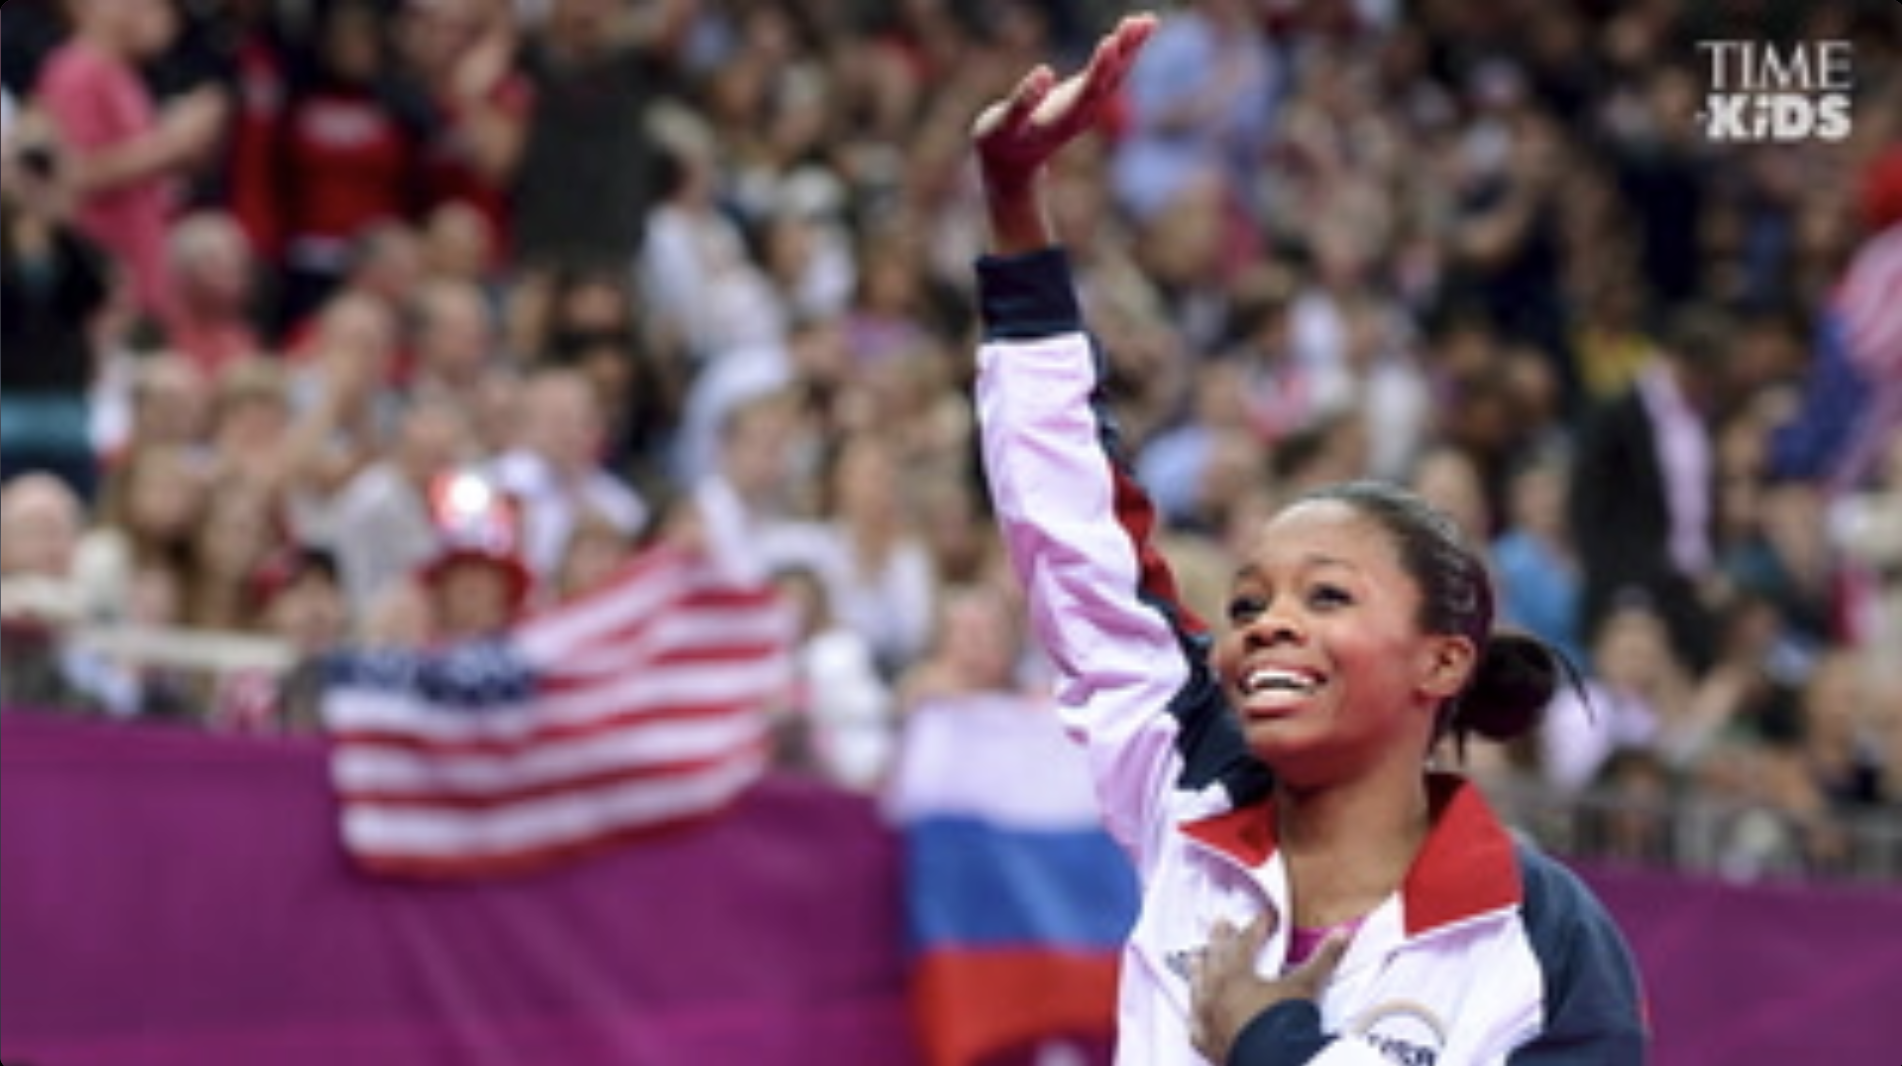 Gabby Douglas smiling, with one hand up above her head and one hand on her chest, against a backdrop of a stadium with an American flag.